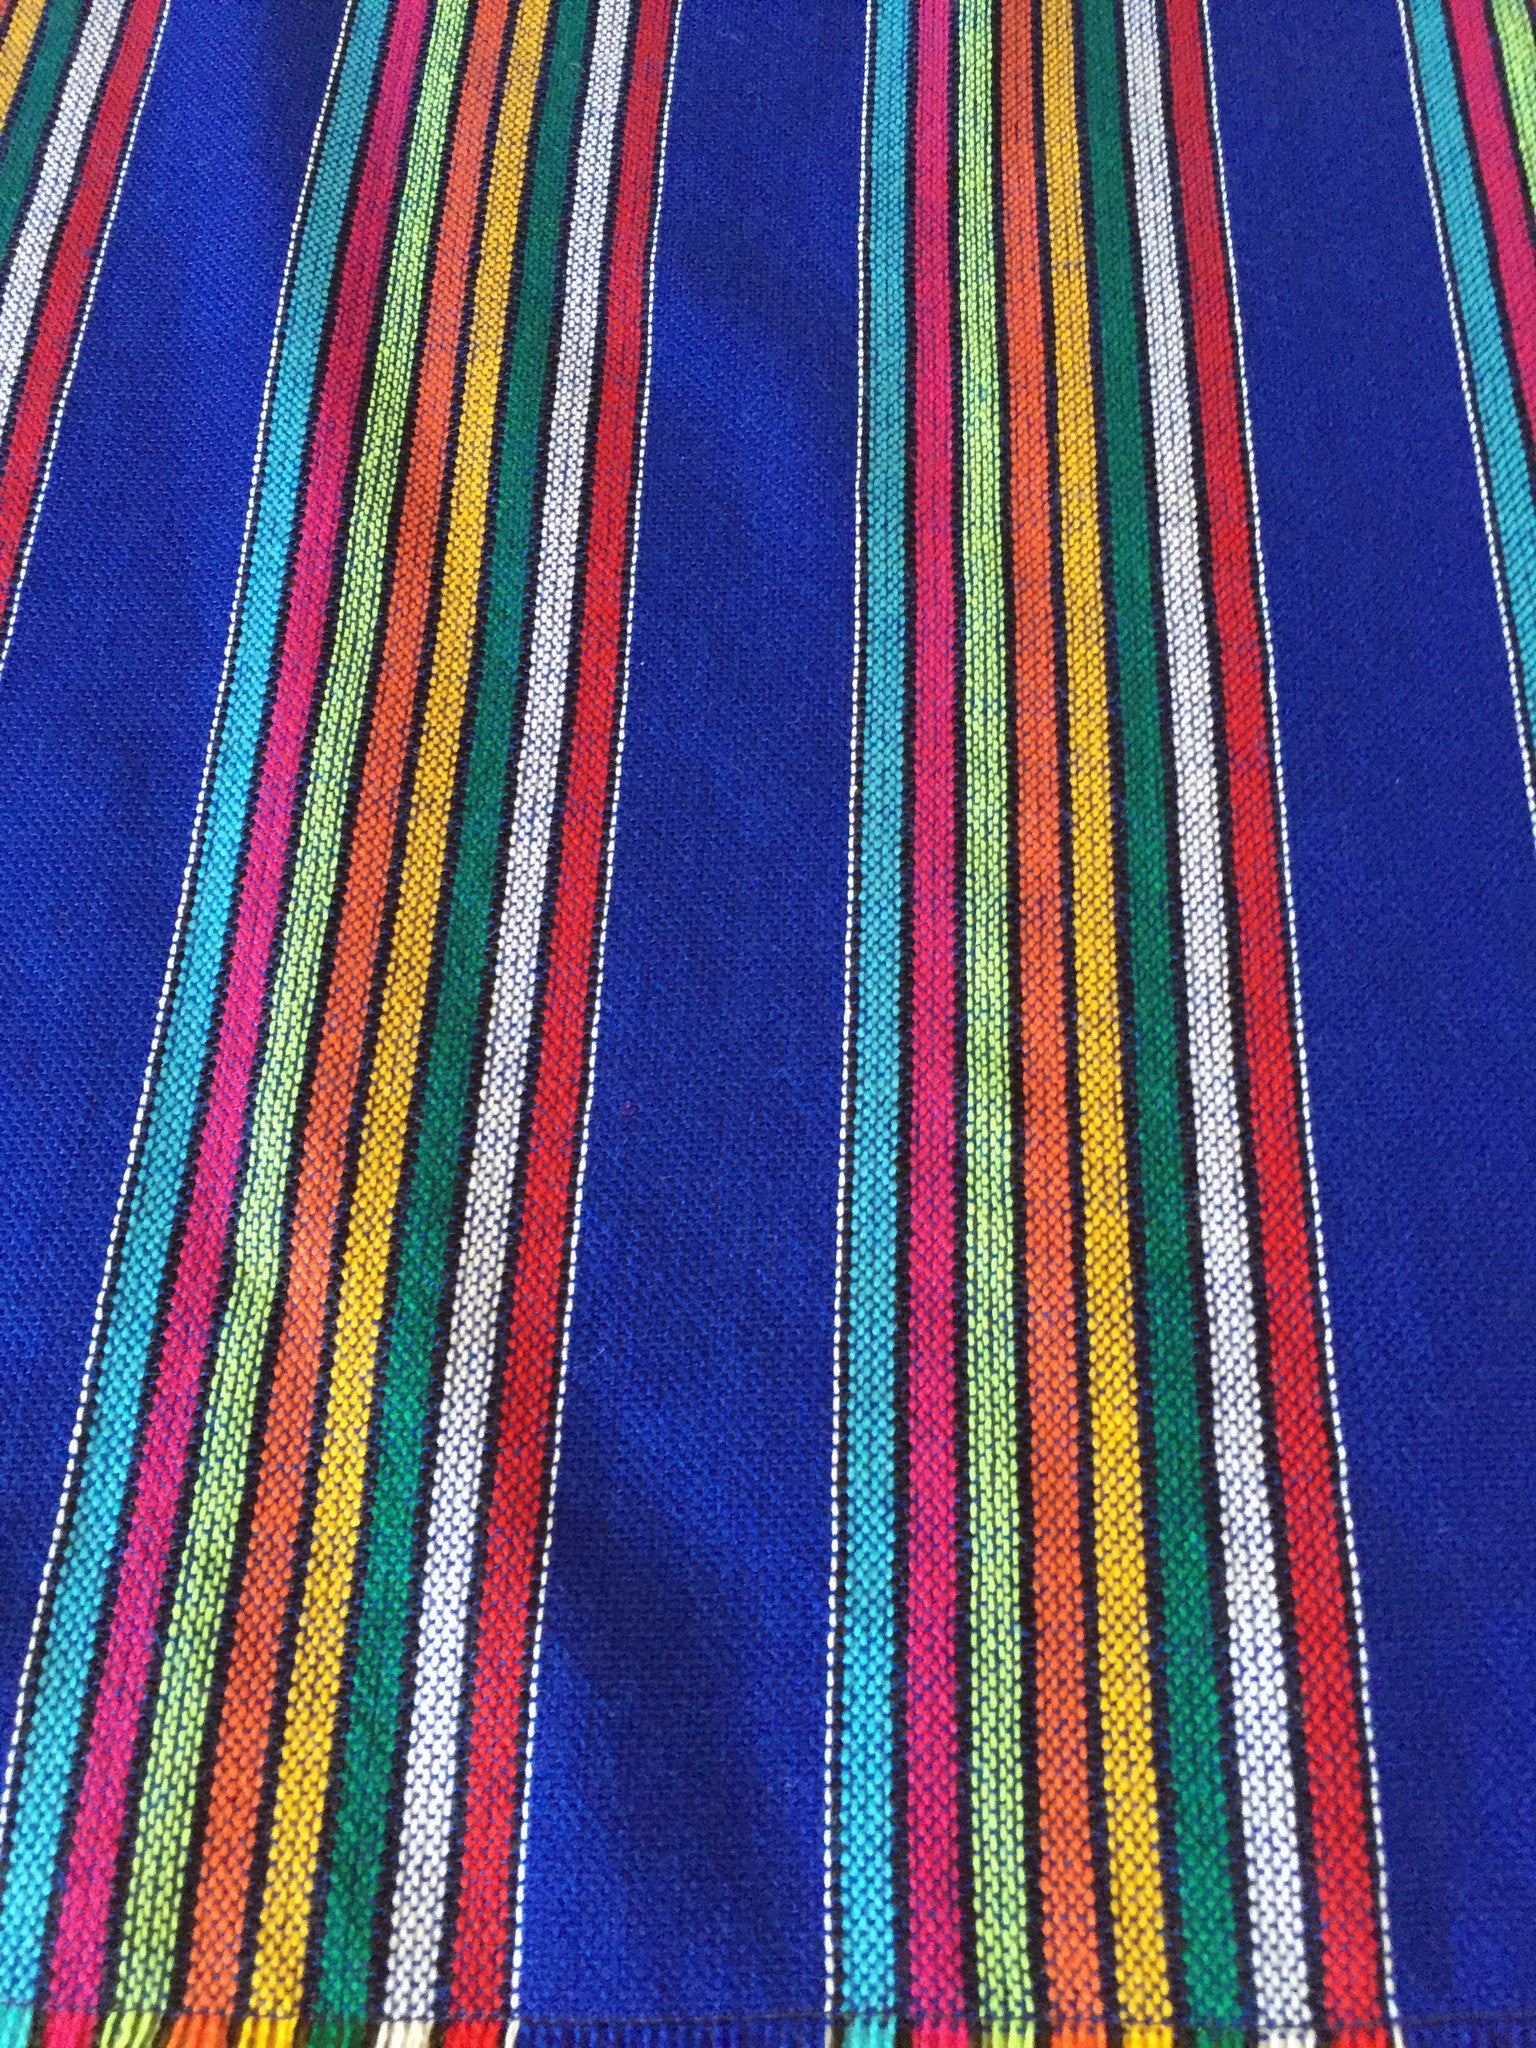 Mexican fabric Table Runner Colorful Blue stripes - MesaChic - 2